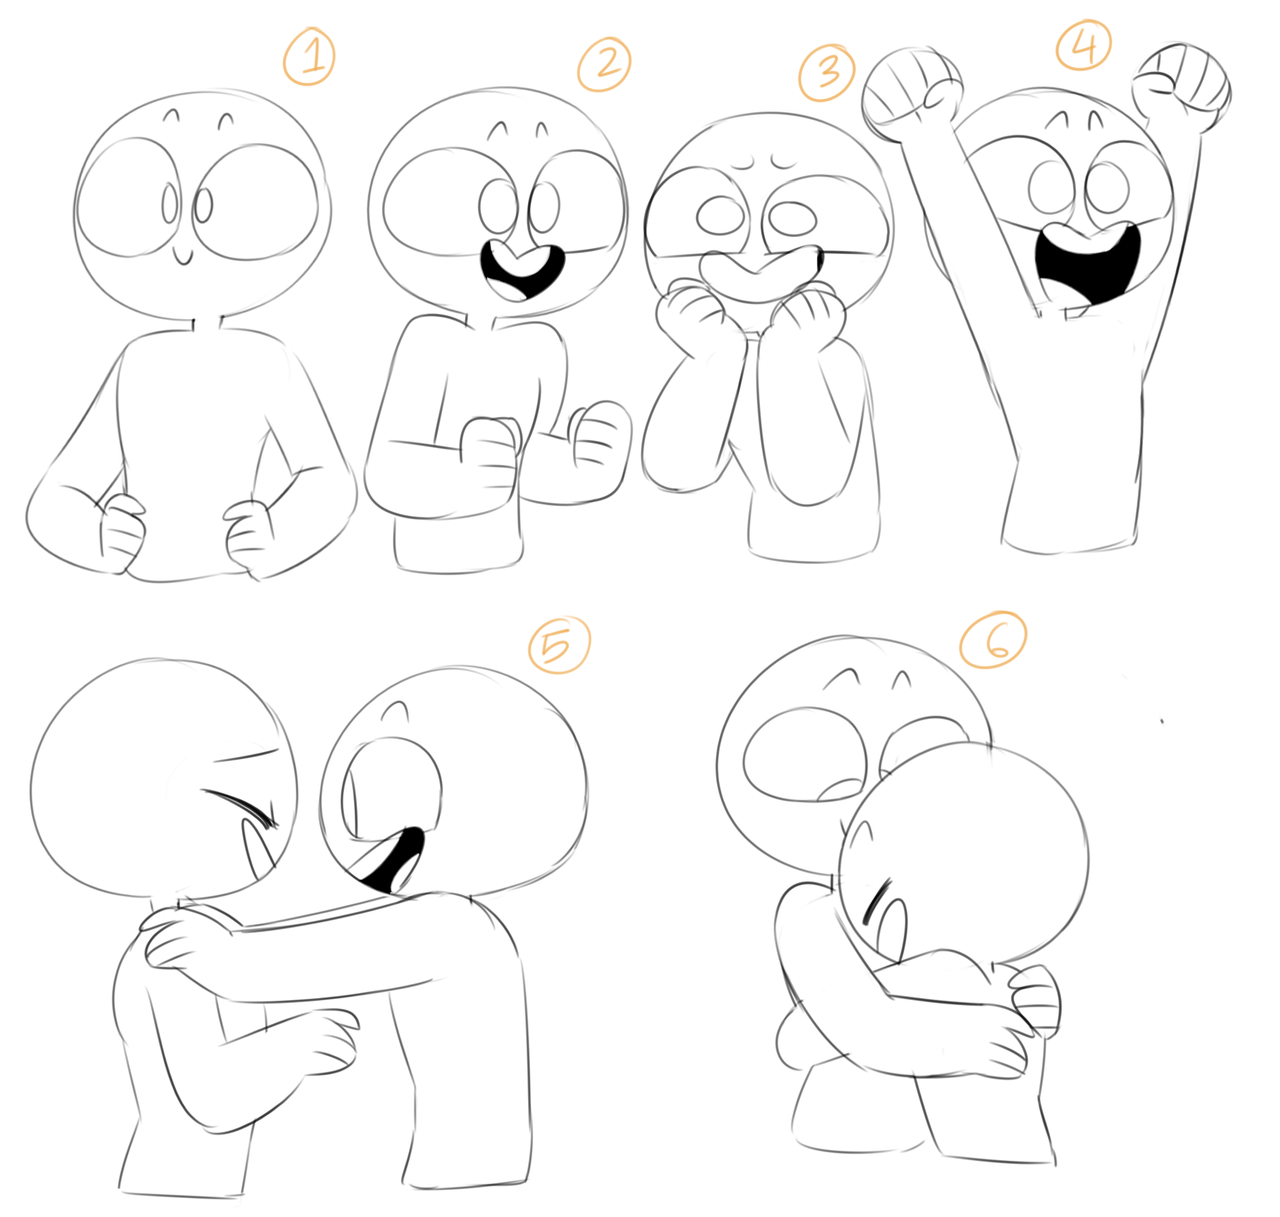 Art Challenge Archive! (mh-presents: HAPPY POSES 1 Okay time for some...)